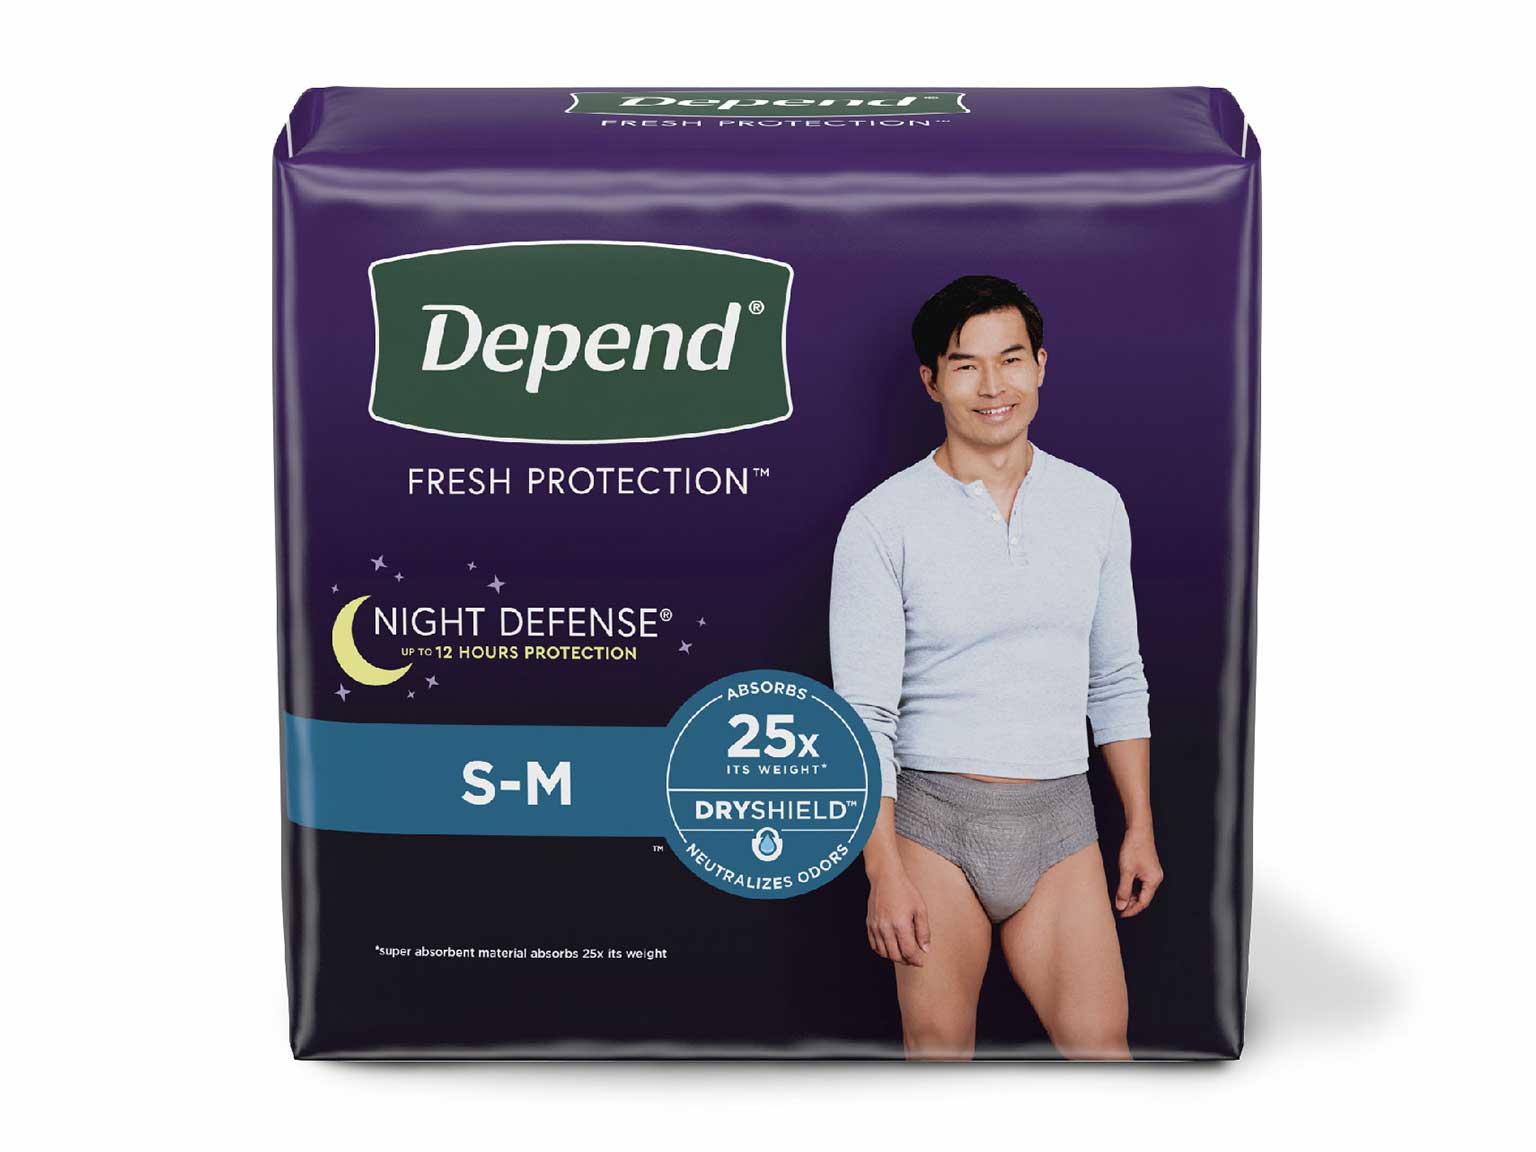 x2 Packs 12 ct Depend Night Defense Men's Overnight Incontinence